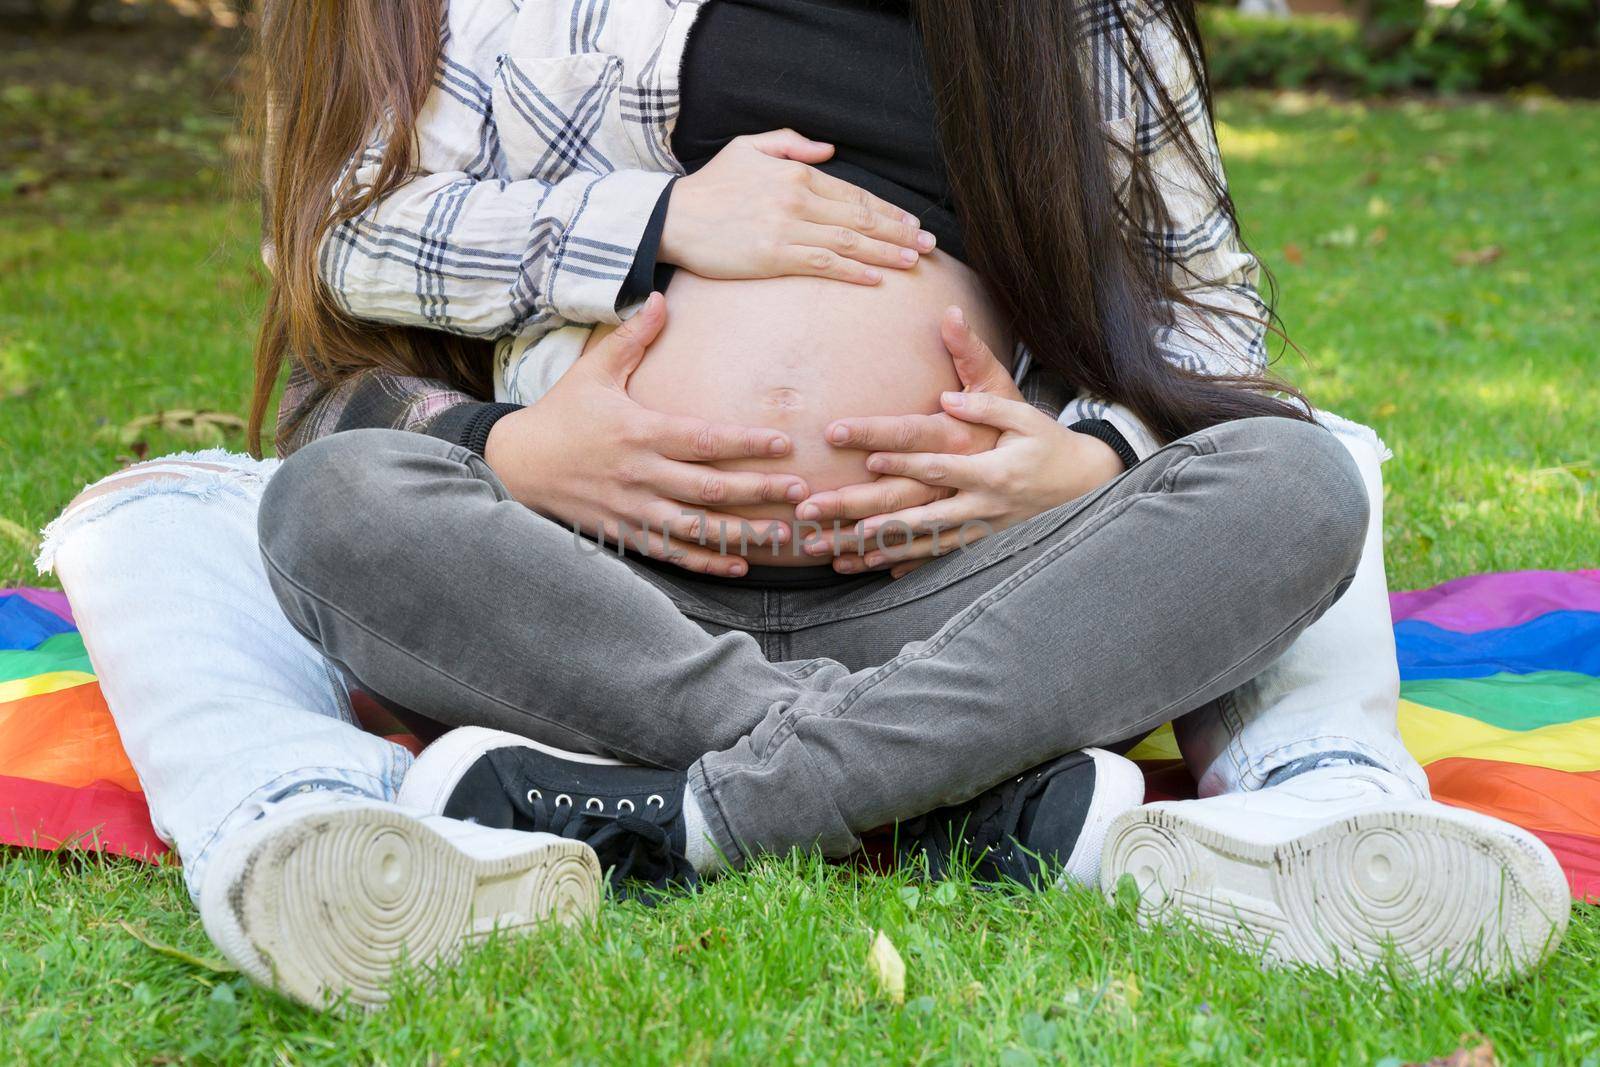 Portrait of unrecognizable affectionate pregnant lesbian couple with rainbow flag, relaxed at the park. Two happy girlfriends. Free same-sex love. Homosexual relationship. LGBT Community Pride by HERRAEZ